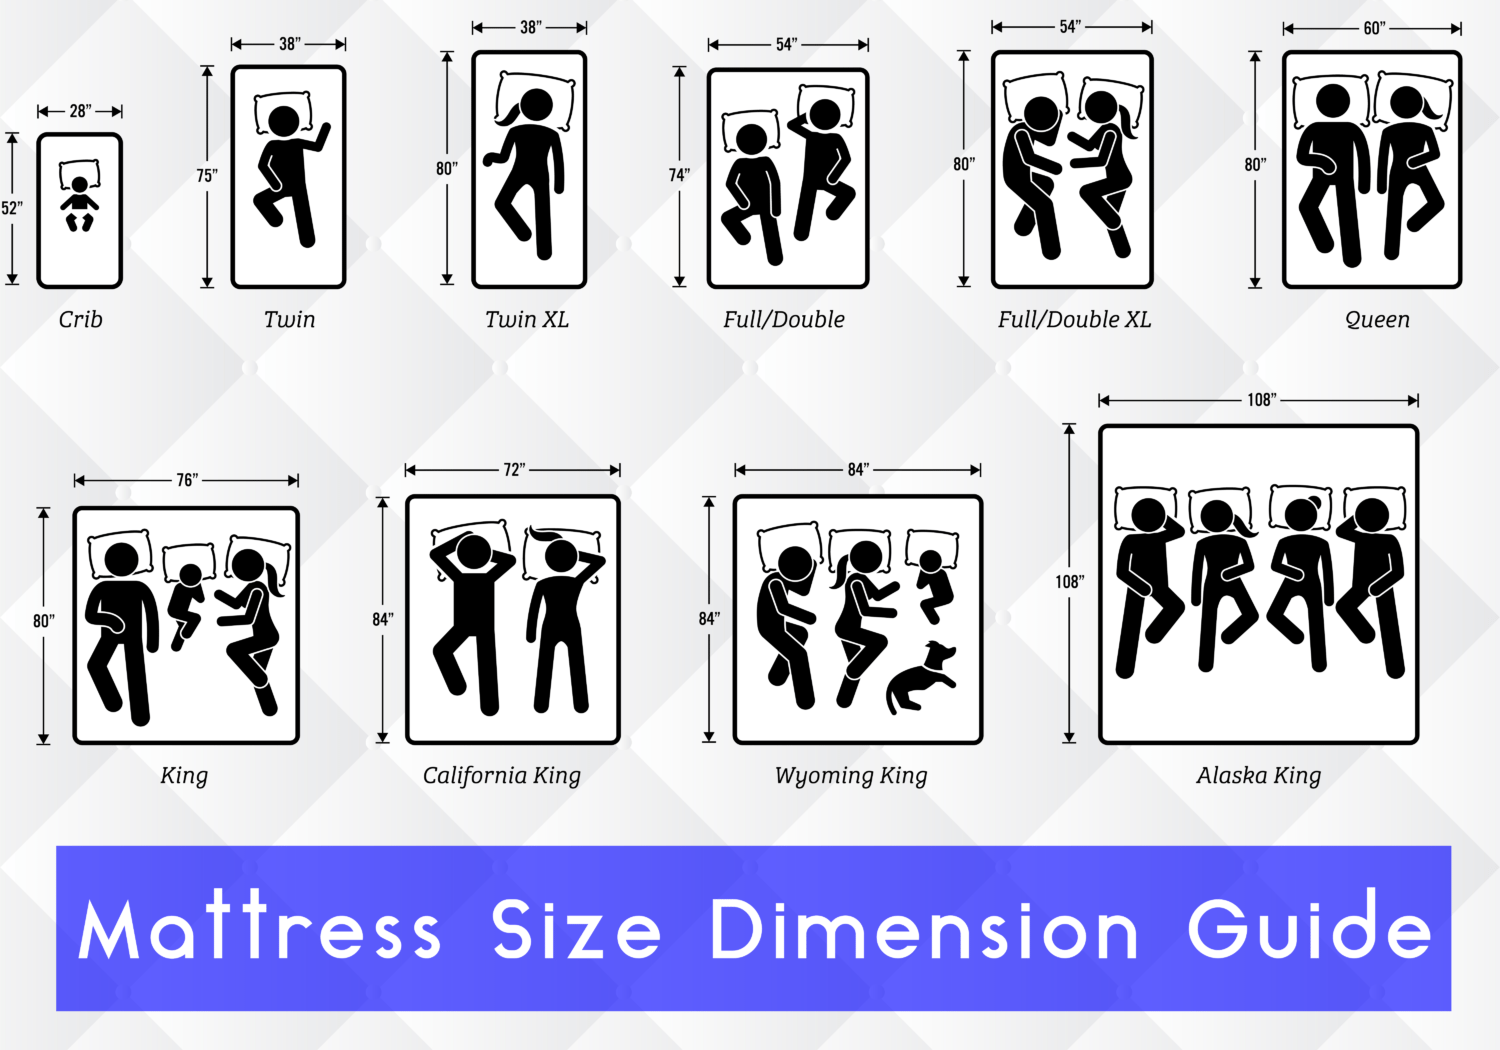 bed size guide